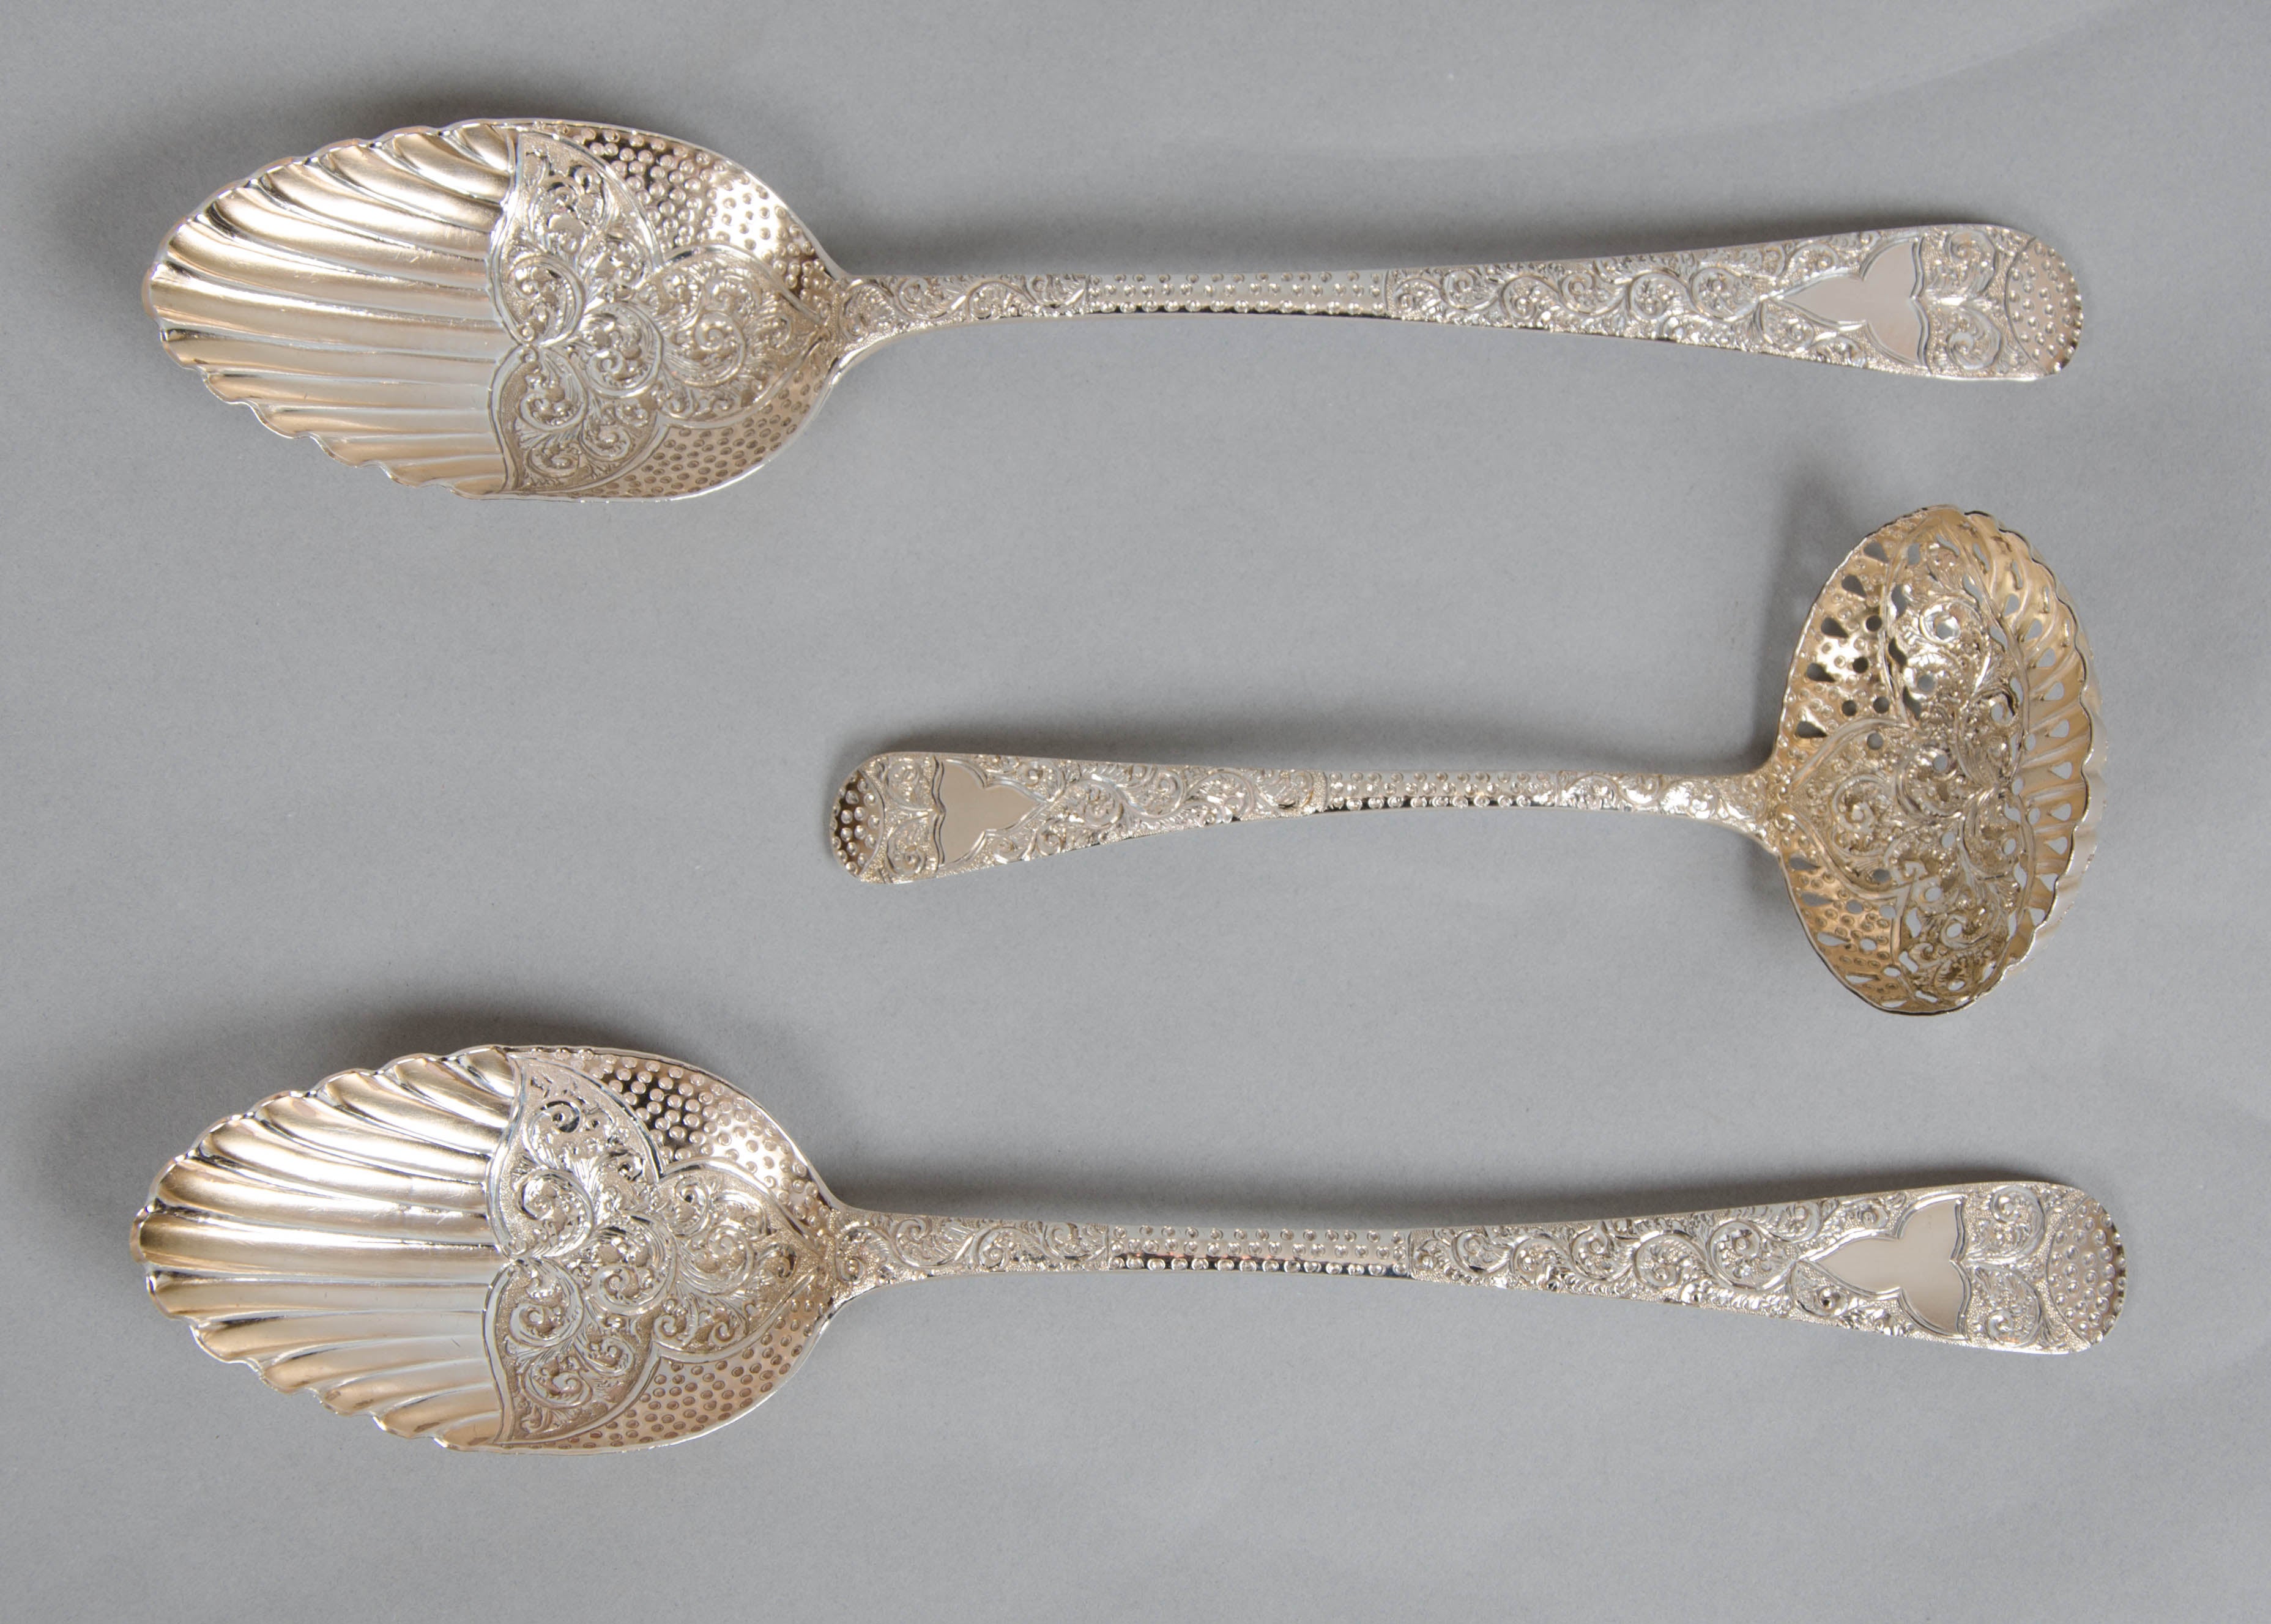 Three-Piece George III Berry Spoons with Sugar Sifter In Excellent Condition For Sale In Dorking, Surrey